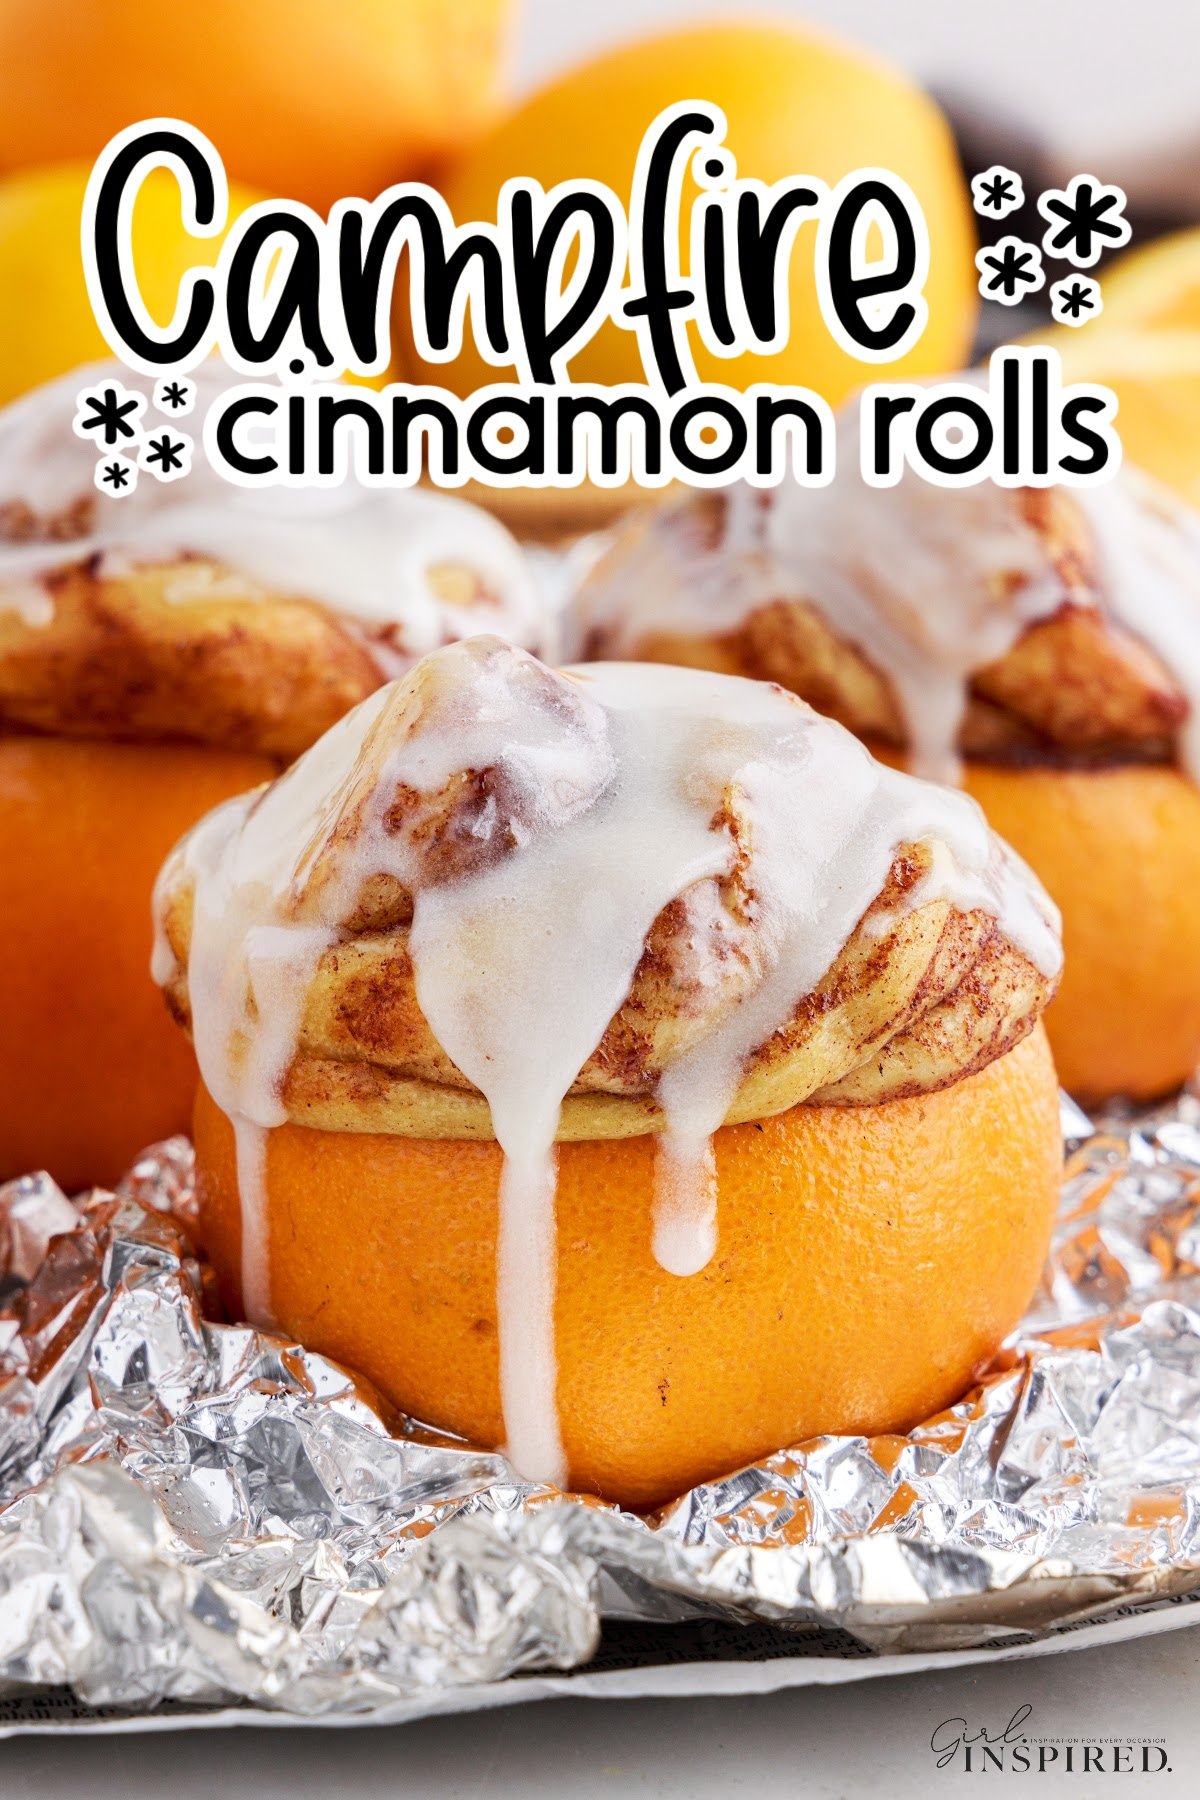 Orange wrapped in aluminum foil stuffed with a baked cinnamon roll dripping with frosting and text title "campfire cinnamon rolls."